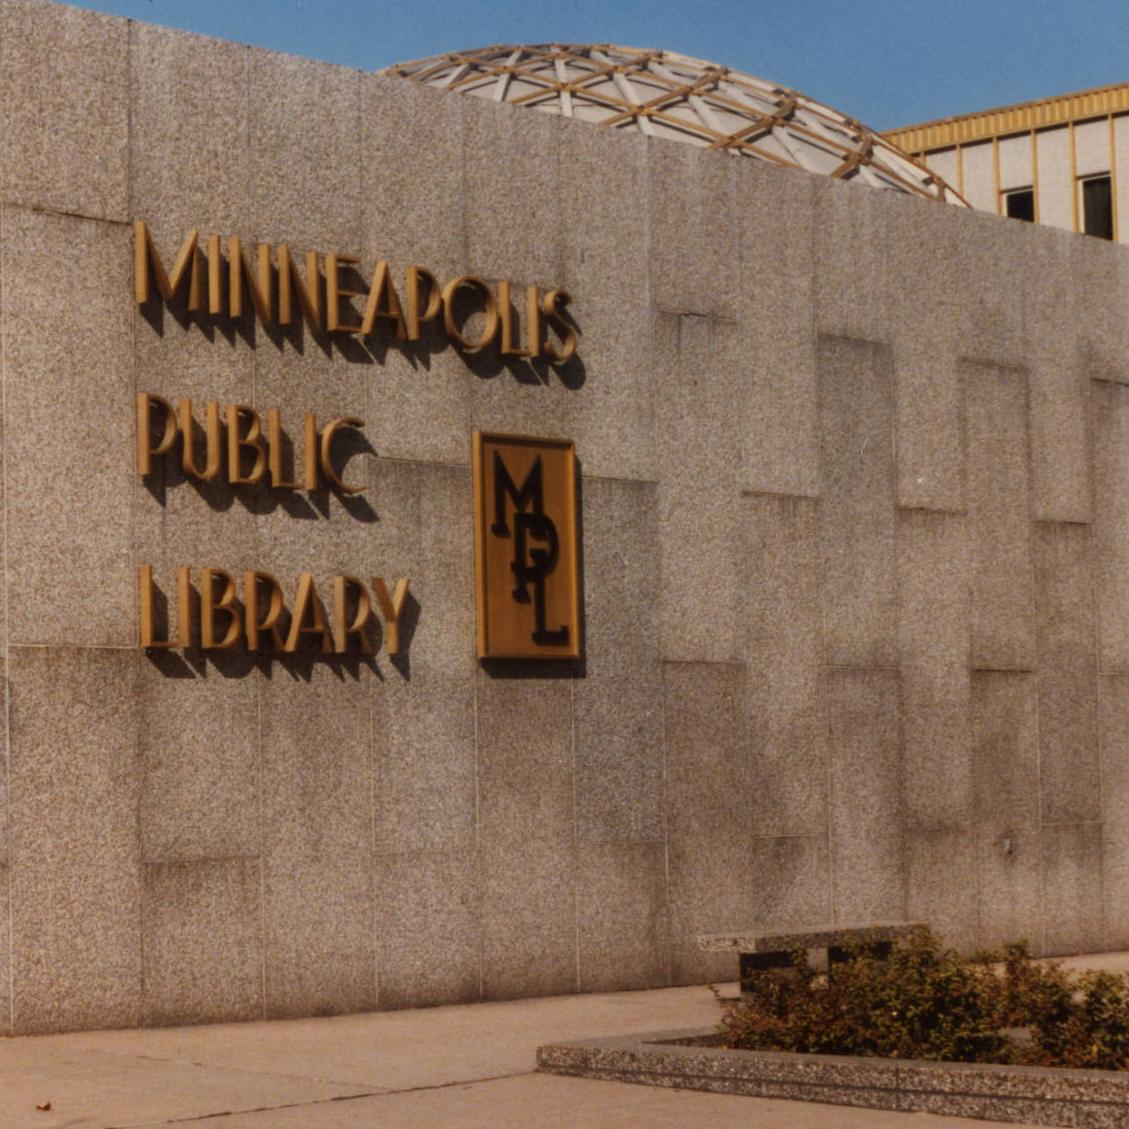 A 1985 photograph of the exterior of the Minneapolis Central Library.